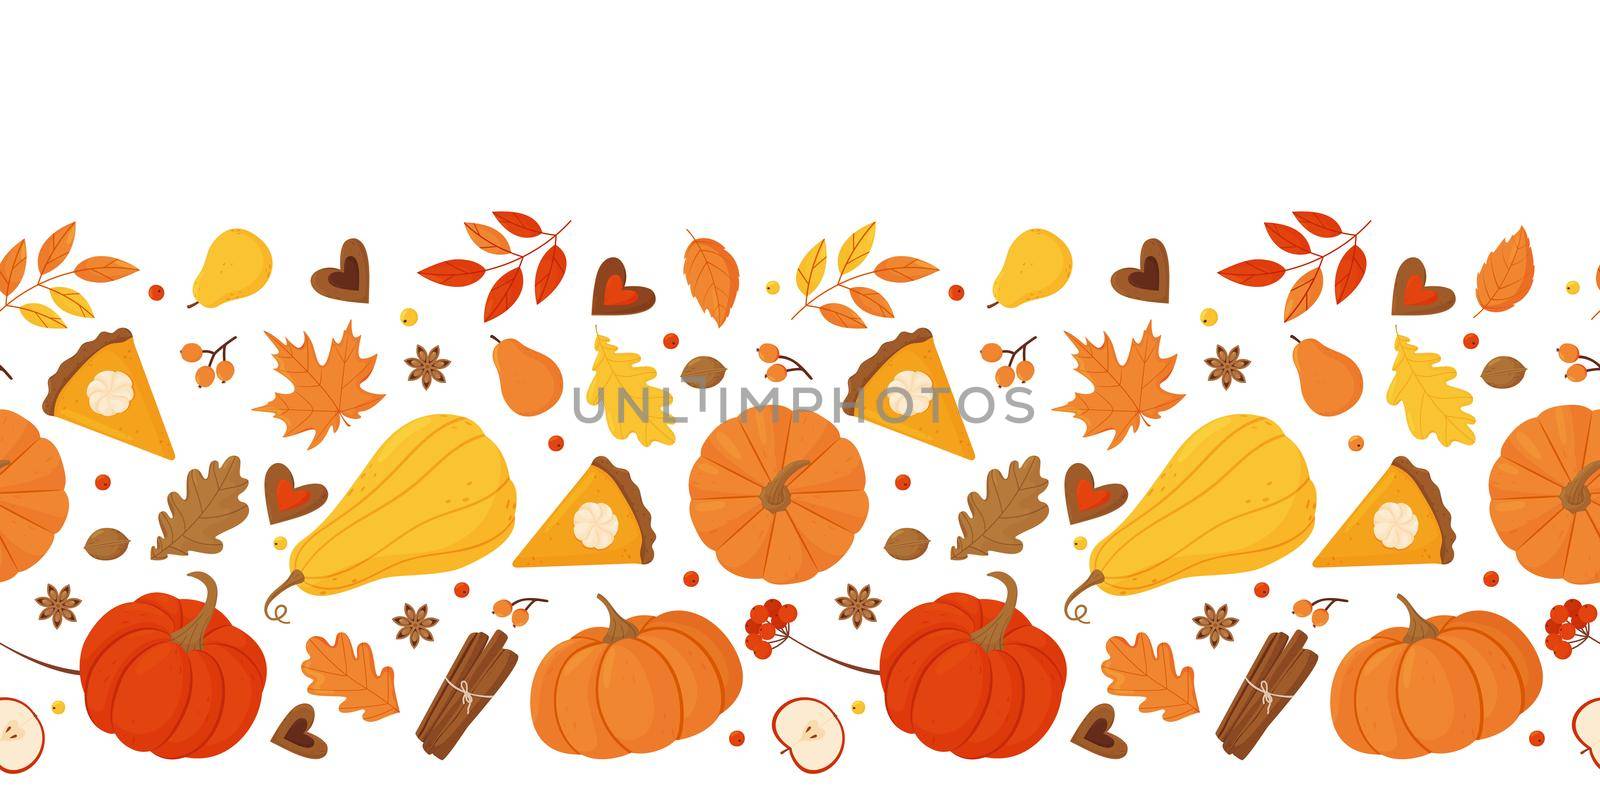 Autumn seamless border with pumpkins, apples, pears, autumn leaves, pumpkin pie, cookies on a white background. by Lena_Khmelniuk